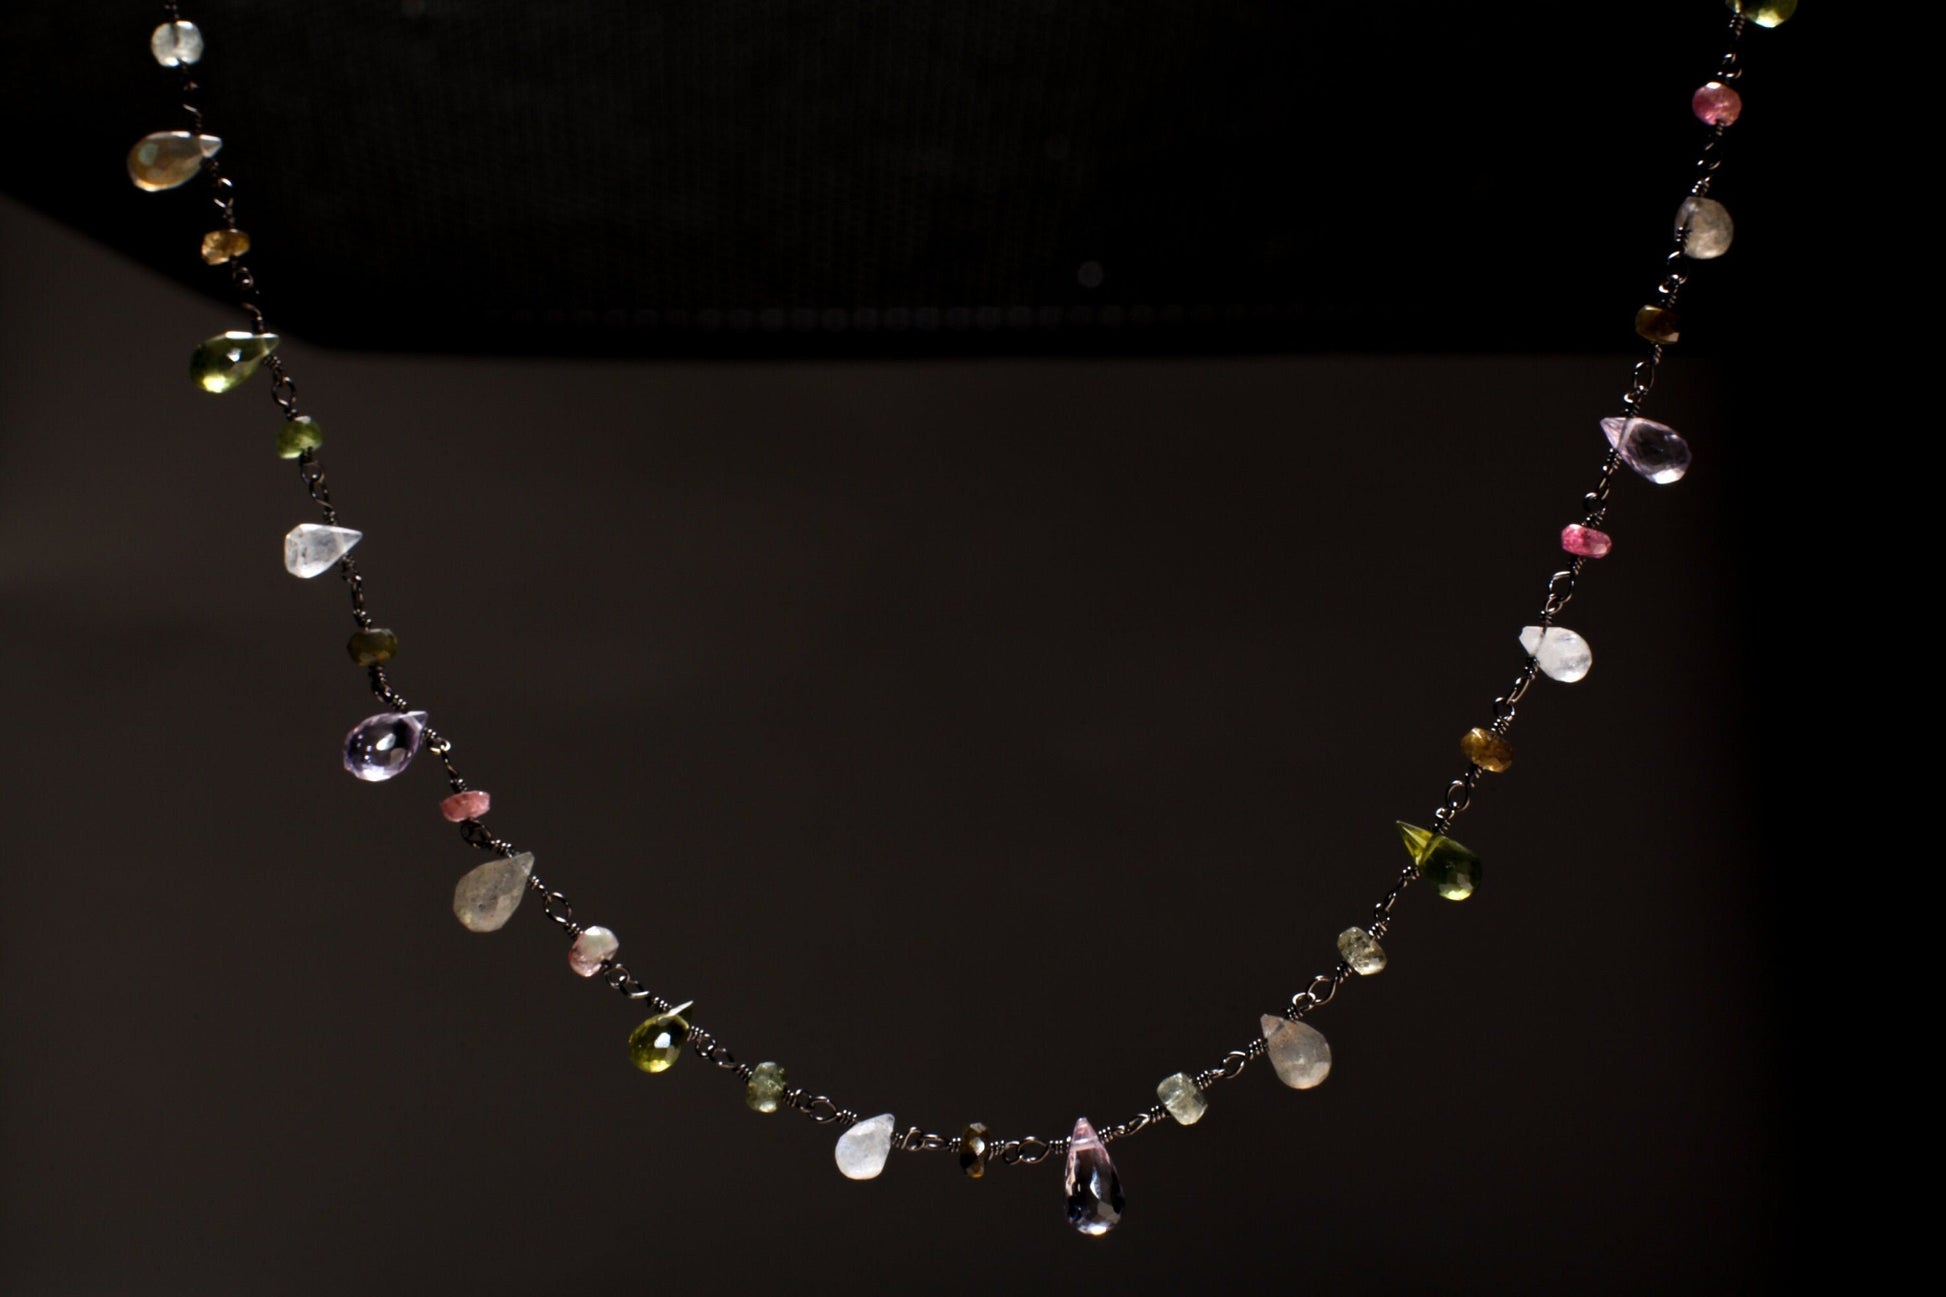 Multi Gemstone Faceted Briolette Rondelle Wire Wrapped Oxidized Silver Necklace, Peridot, Labradorite, Moonstone, Tourmaline, Pink Amethyst